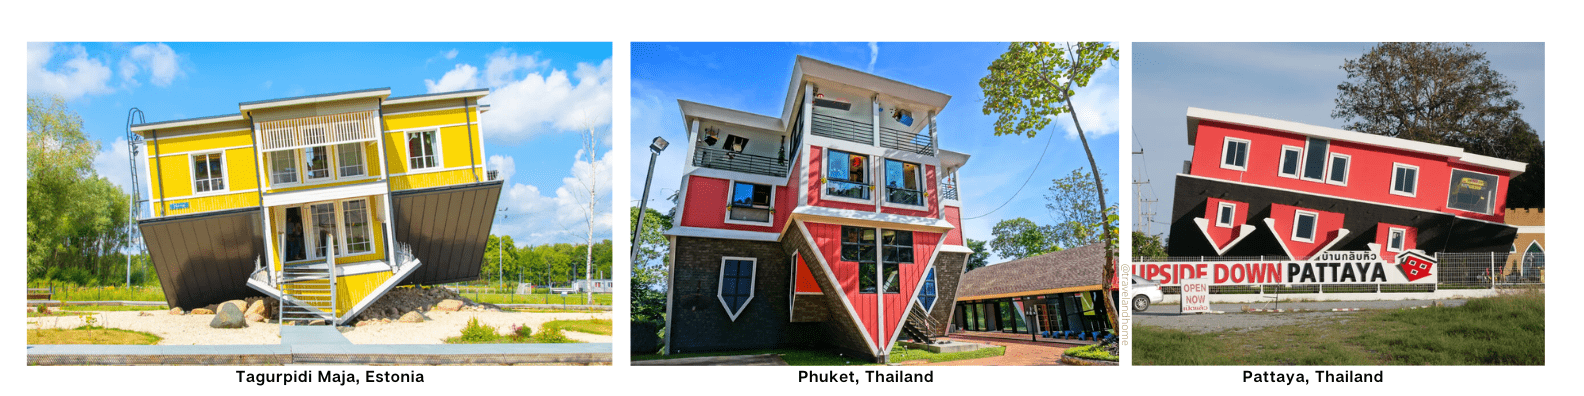 List of upside down houses in the world estonia thailand min